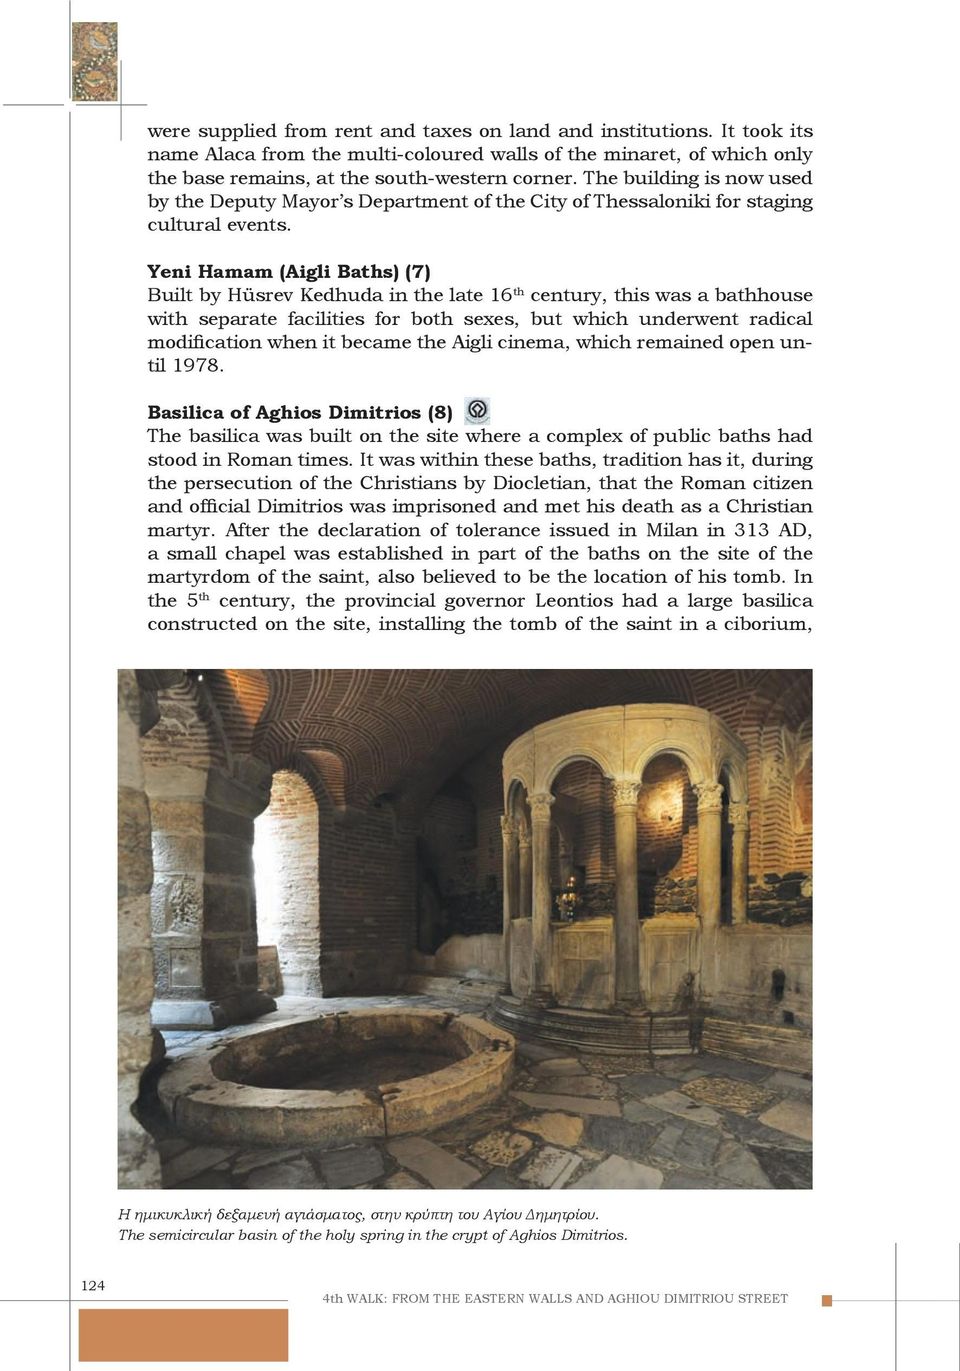 Yeni Hamam (Aigli Baths) (7) Built by Hüsrev Kedhuda in the late 16 th century, this was a bathhouse with separate facilities for both sexes, but which underwent radical modification when it became